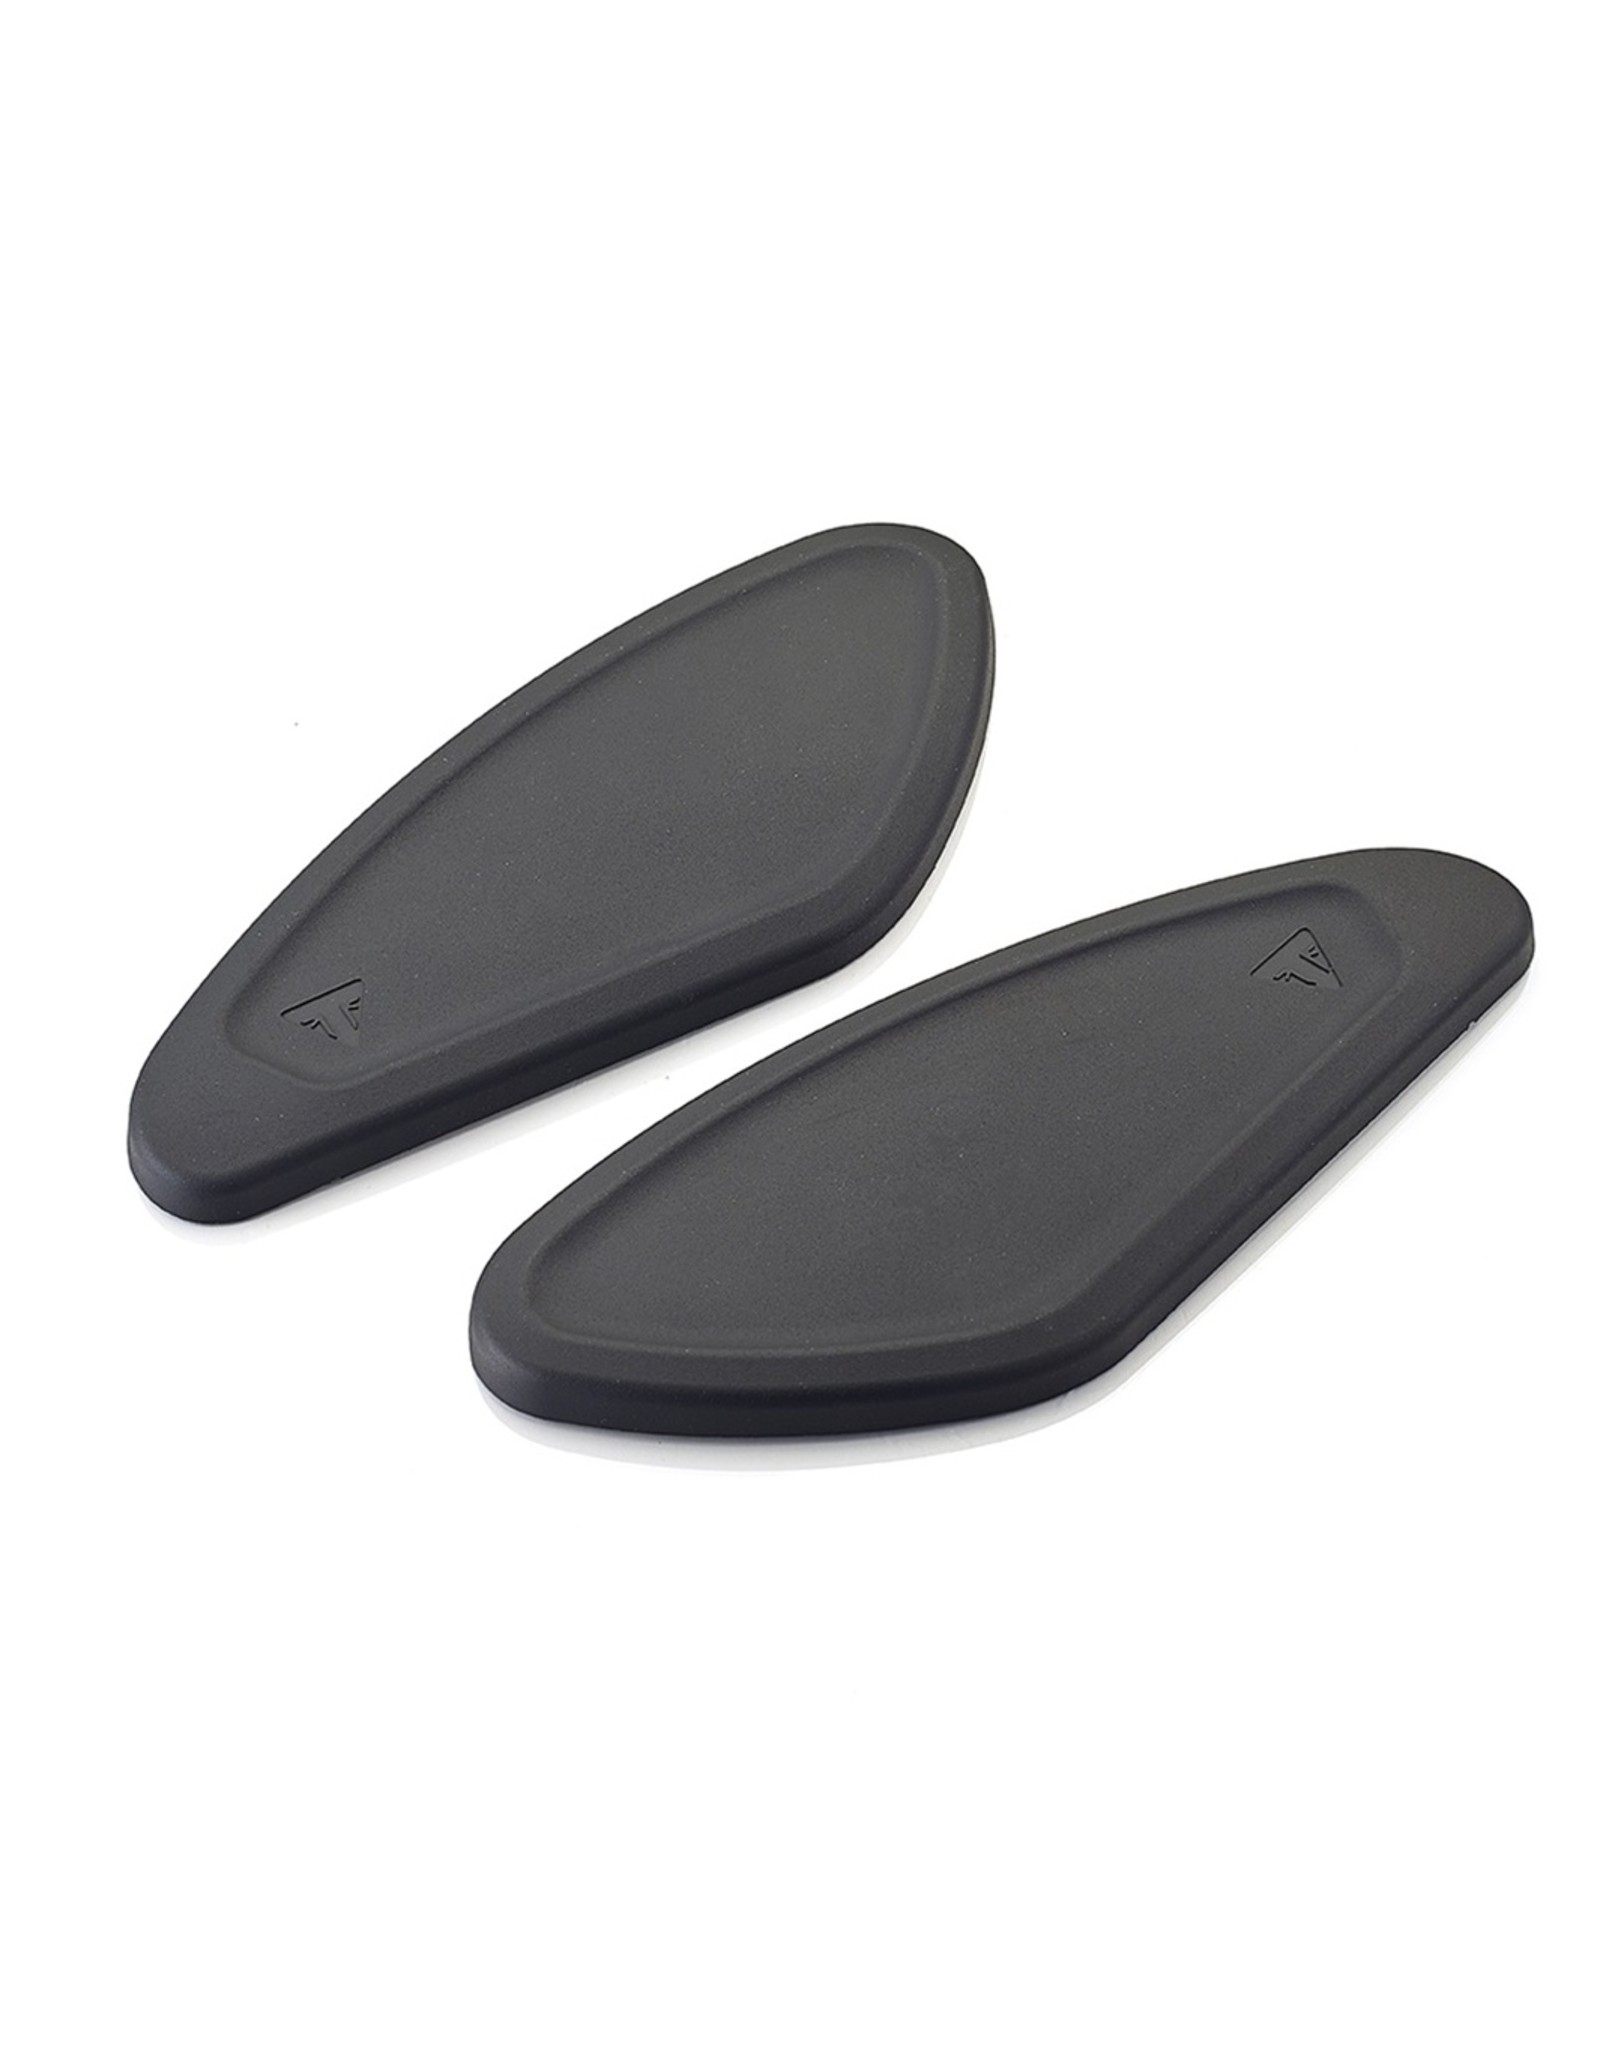 Rubber Knee Pads